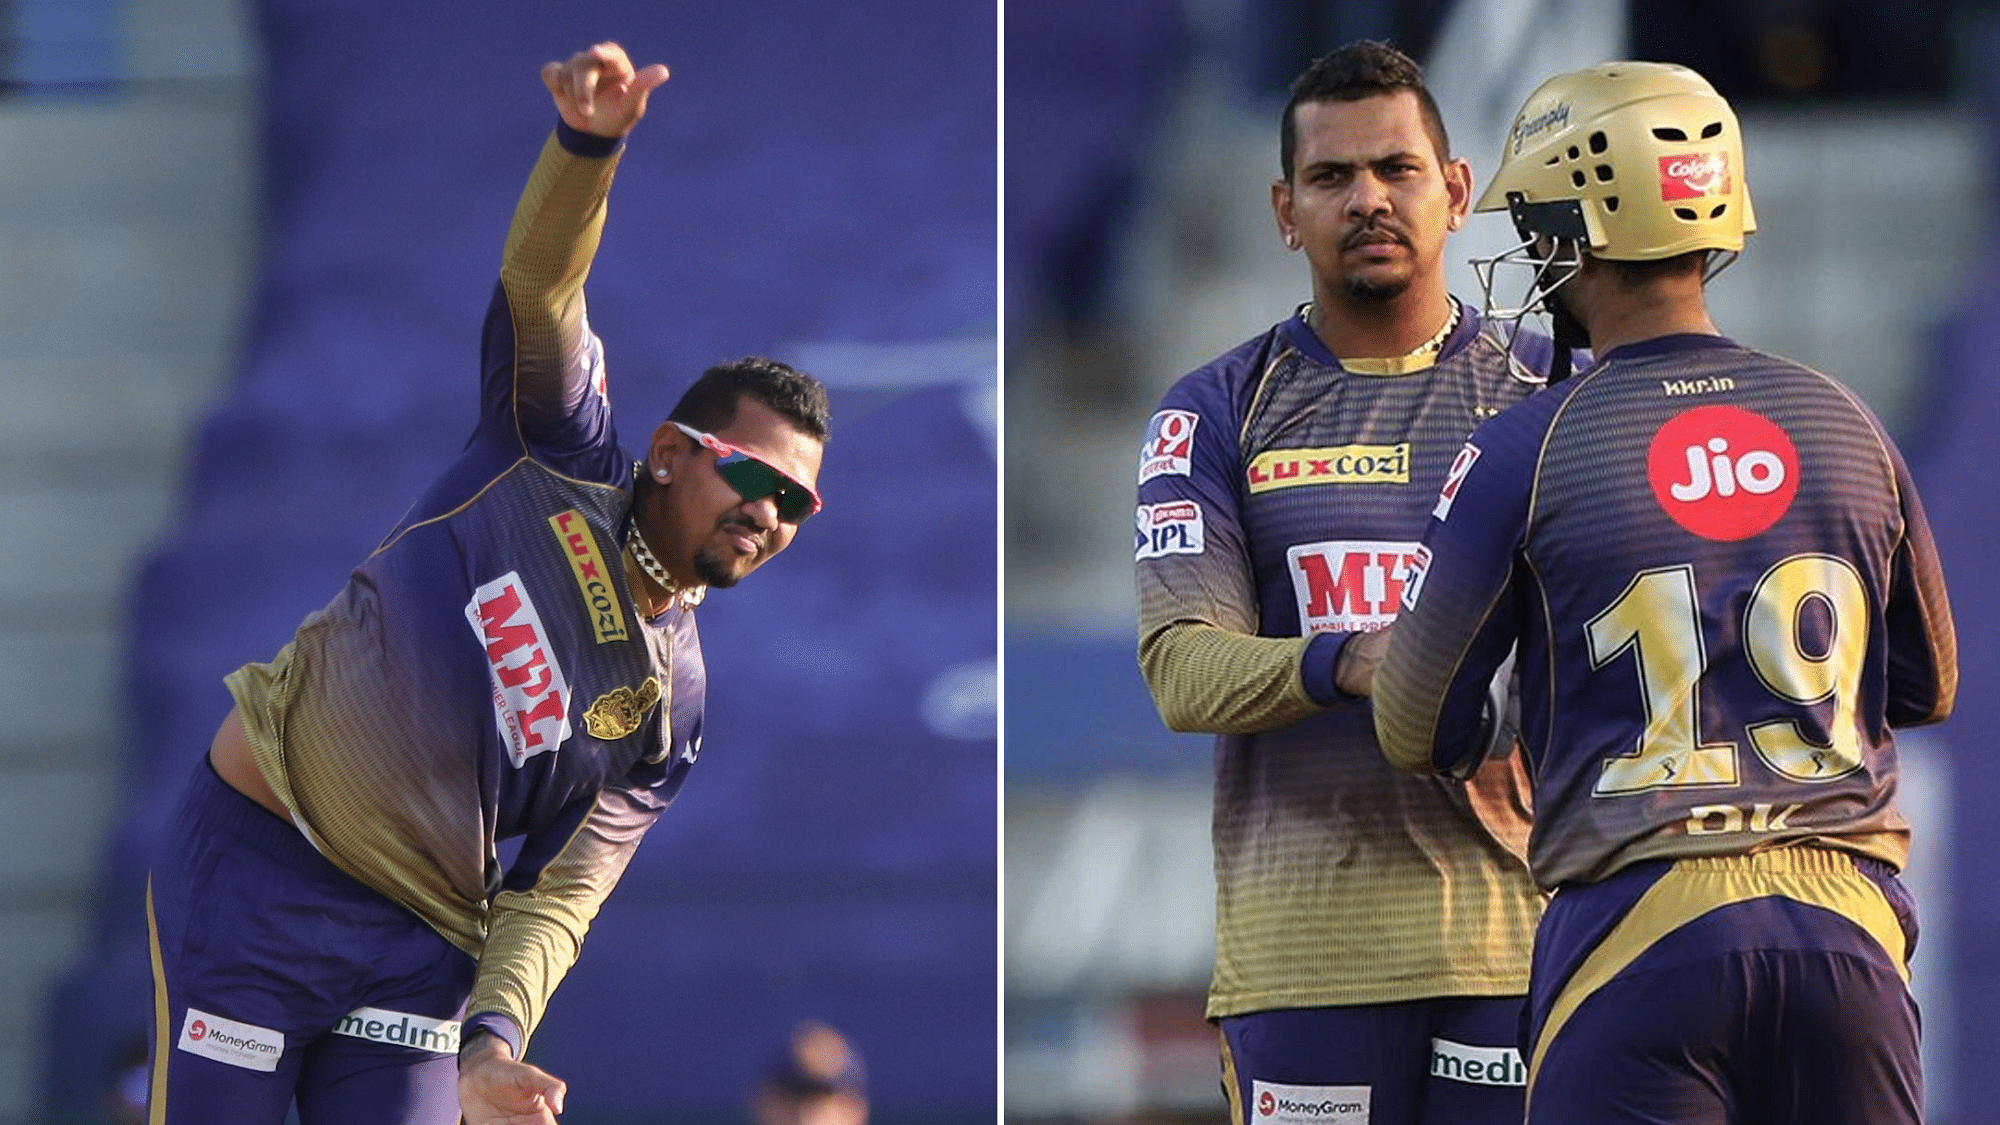 Kolkata Knight Riders’ spinner Sunil Narine was reported for an illegal bowling action and was placed on the warning list.